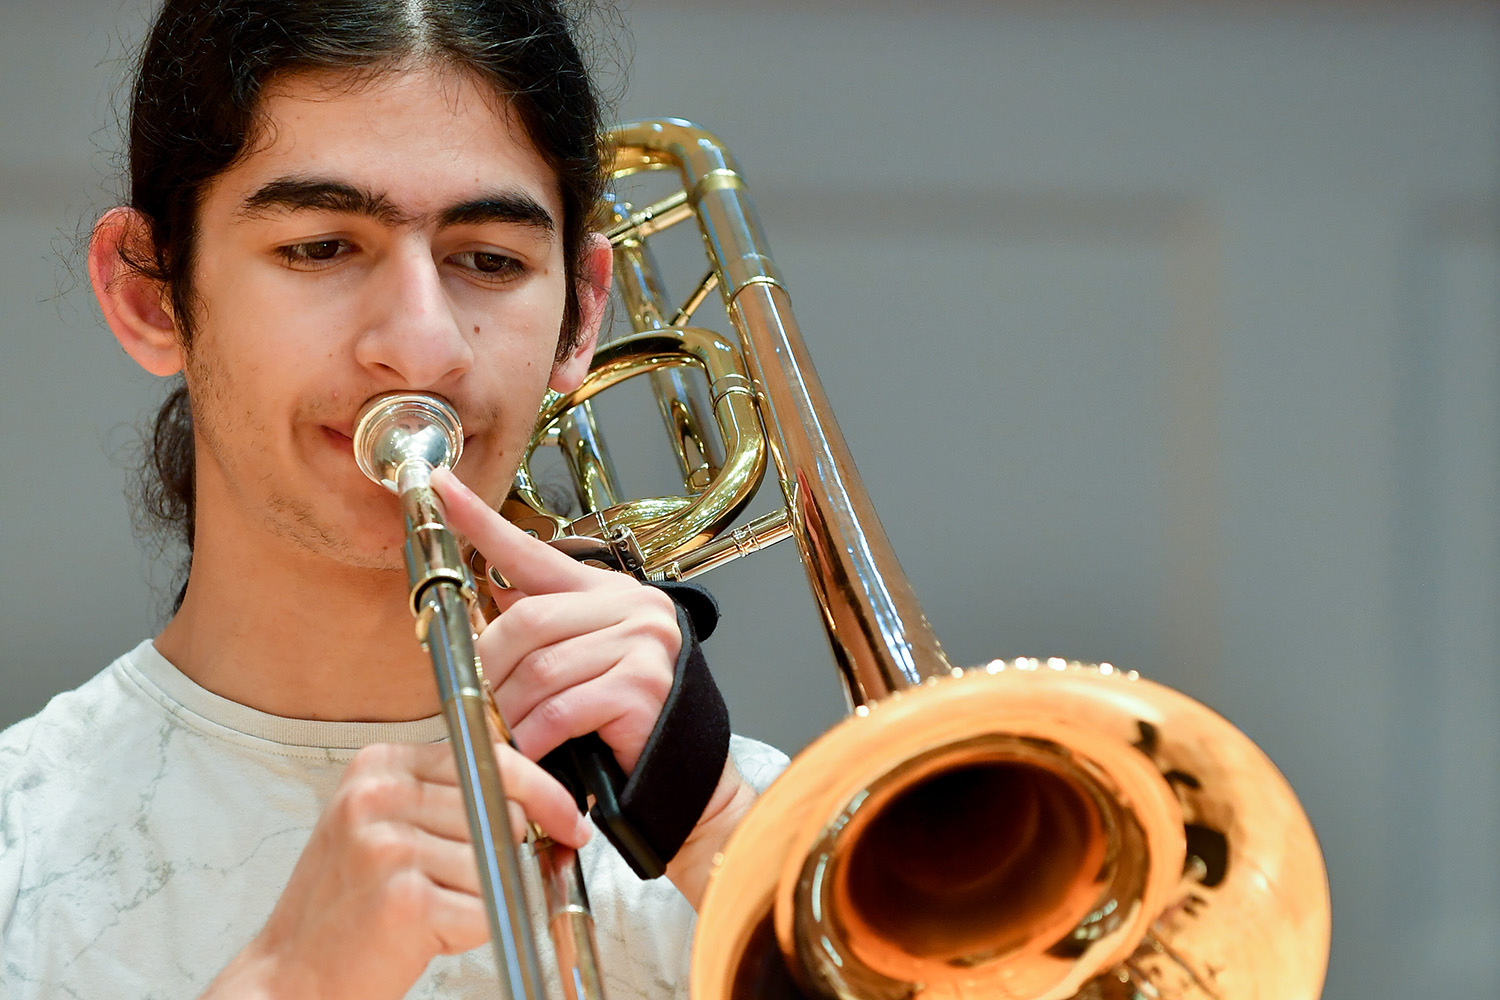 A brass student from the Junior Department performs on a trombone